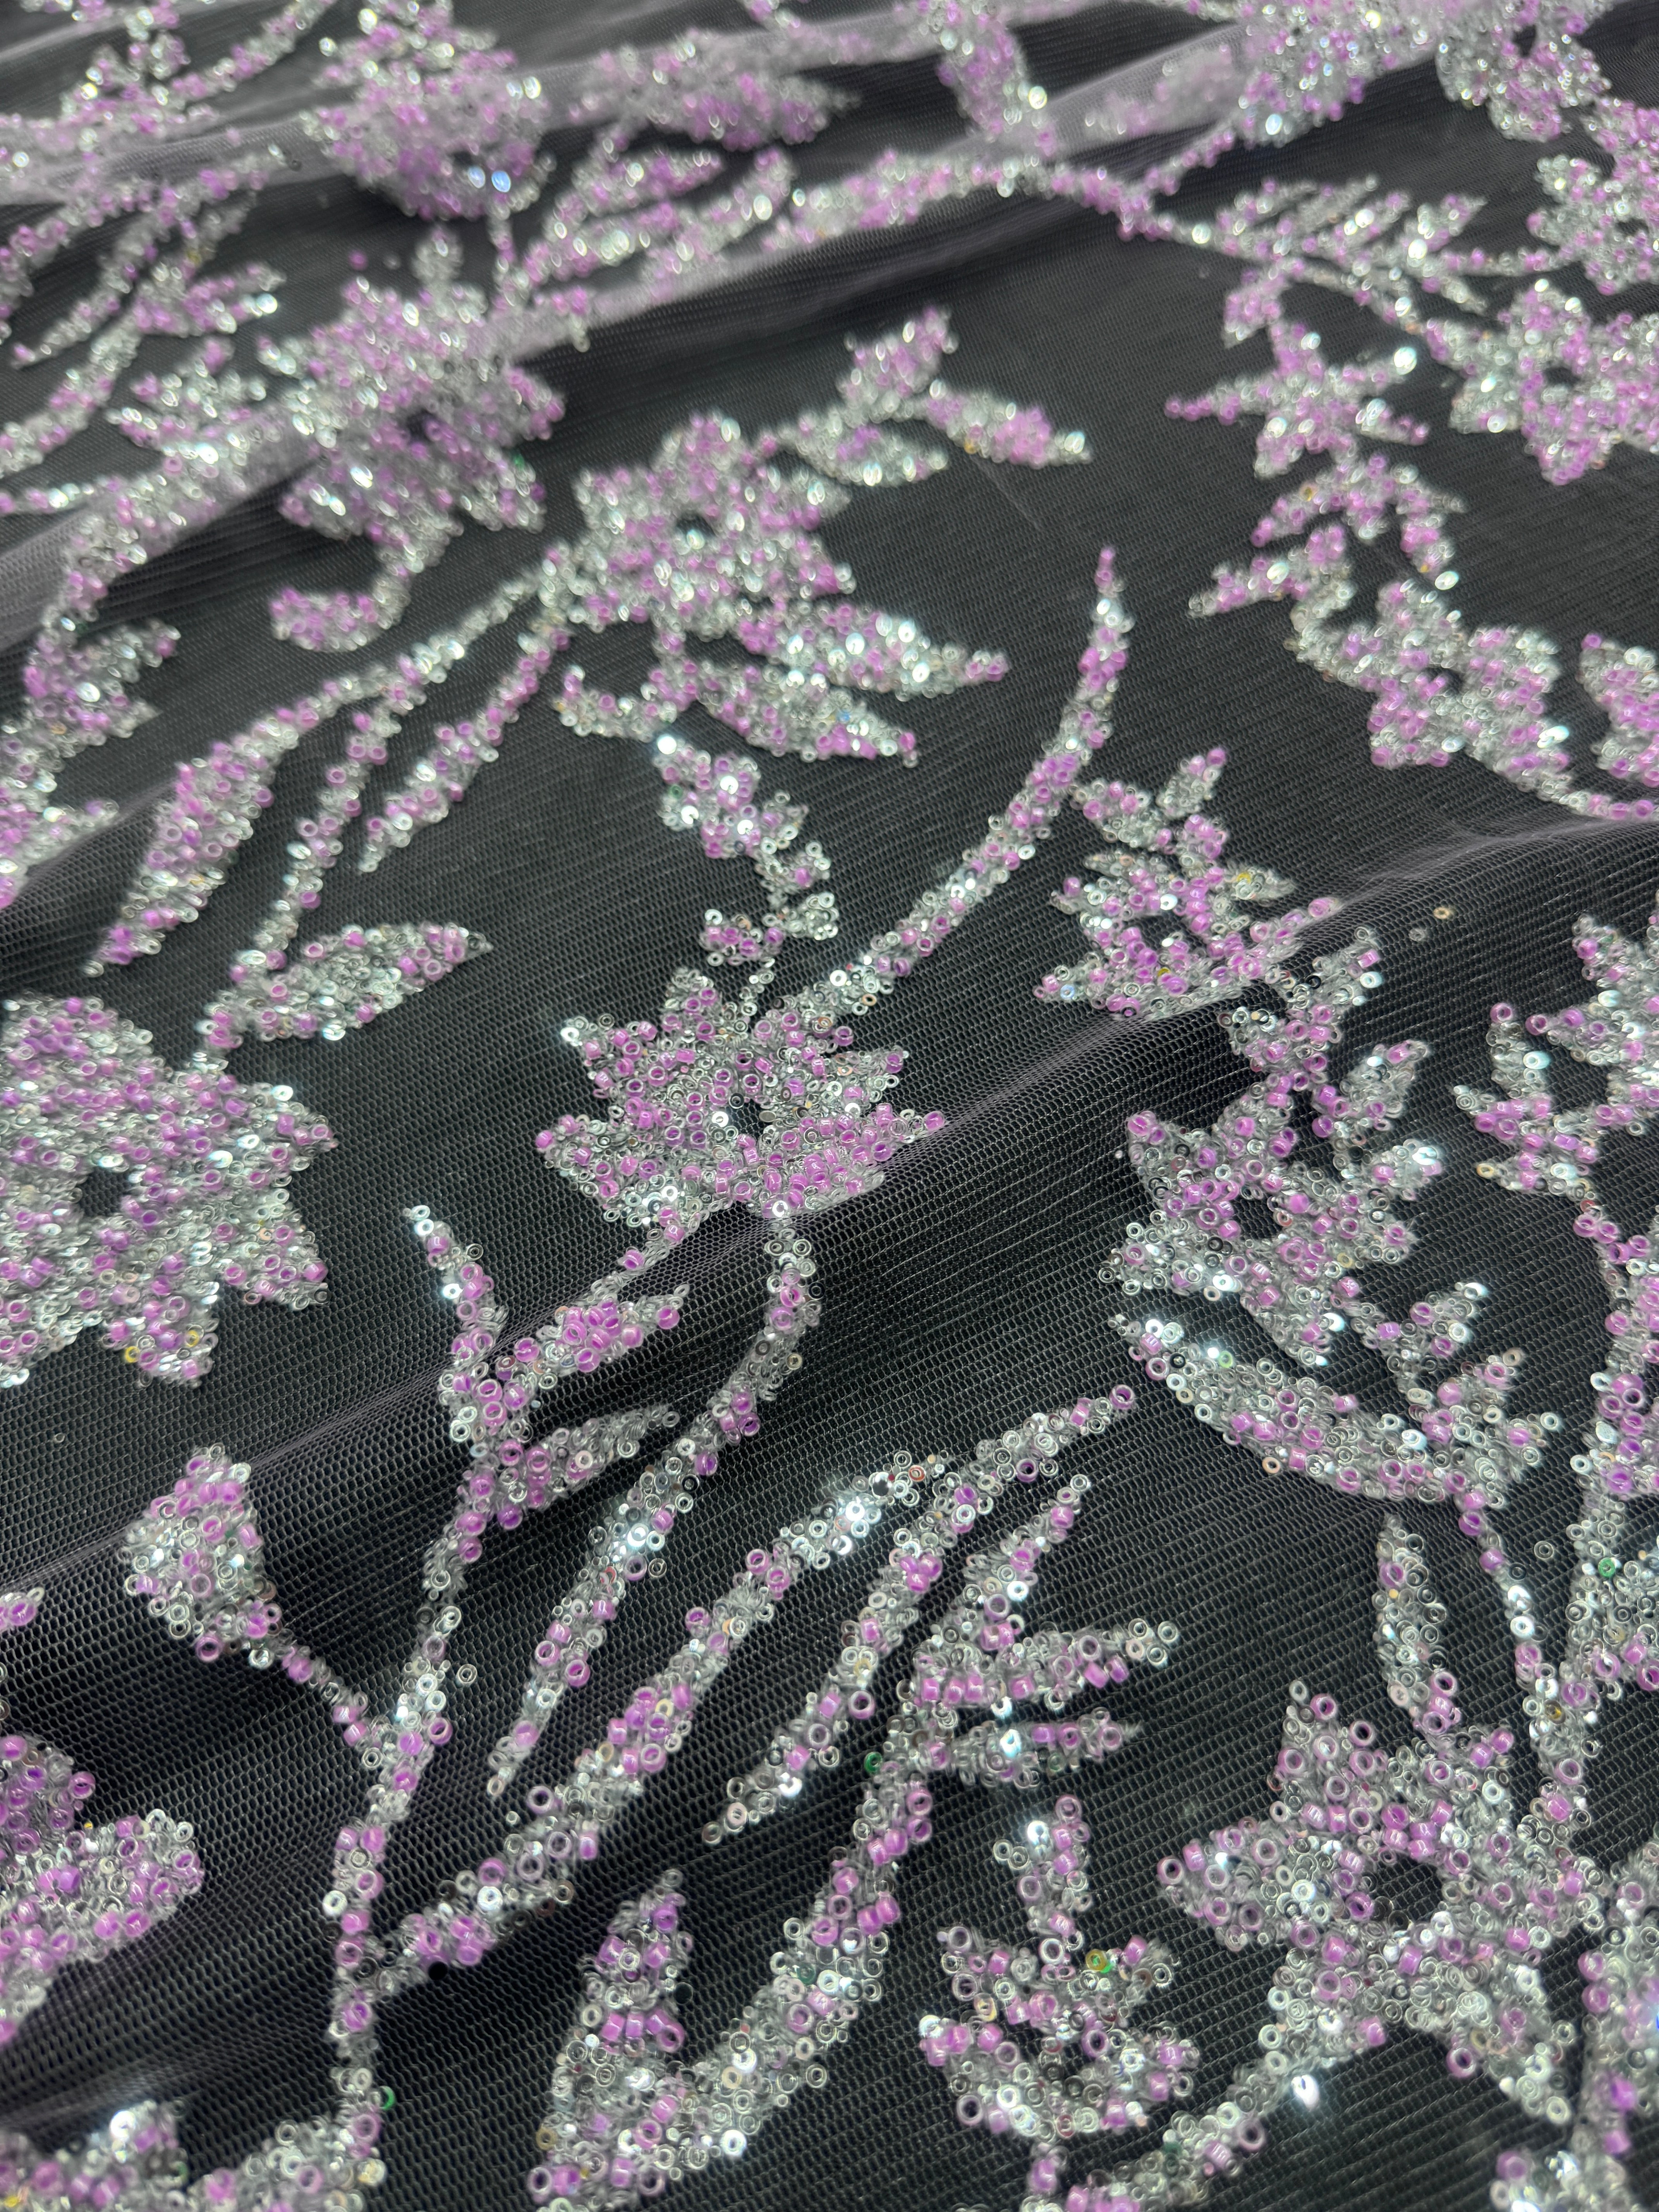 Lavender Silver Floral Beaded Lace, online textile store, sewing, fabric store, sewing store, cheap fabric store, kiki textiles